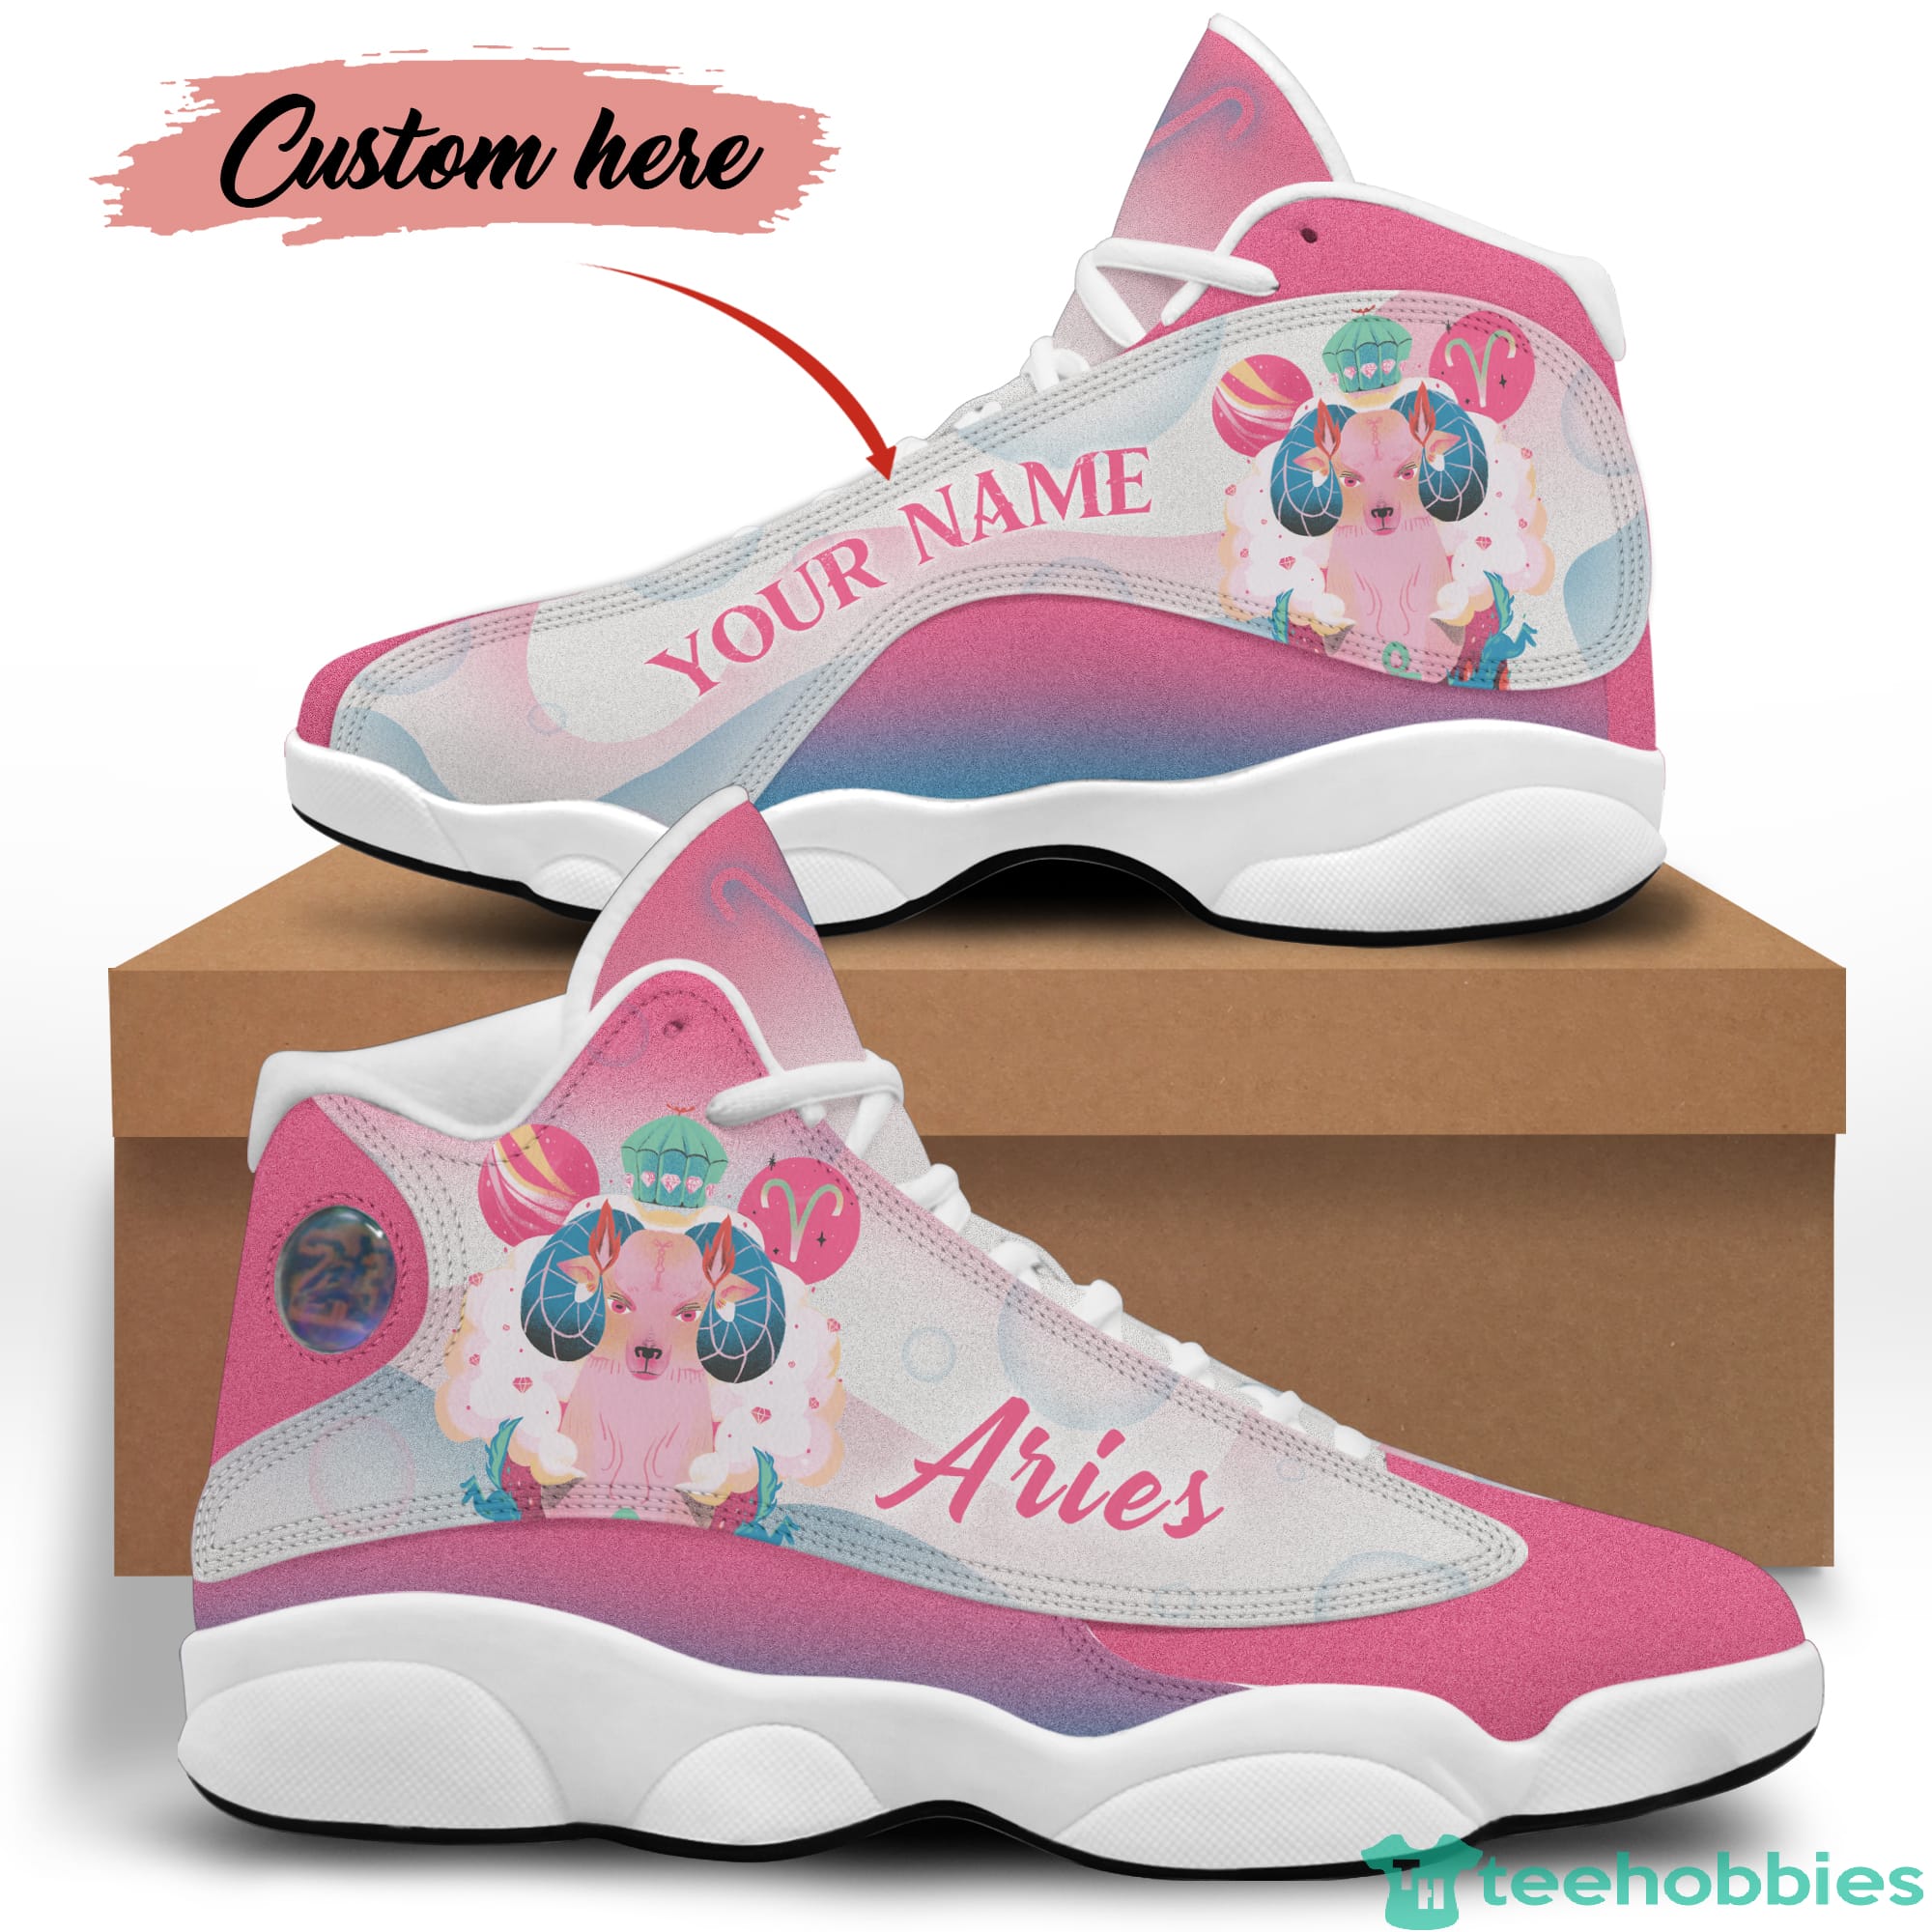 Aries Birthday Gift Personalized Name Personalized Name Air Jordan 13 Shoes SKU279